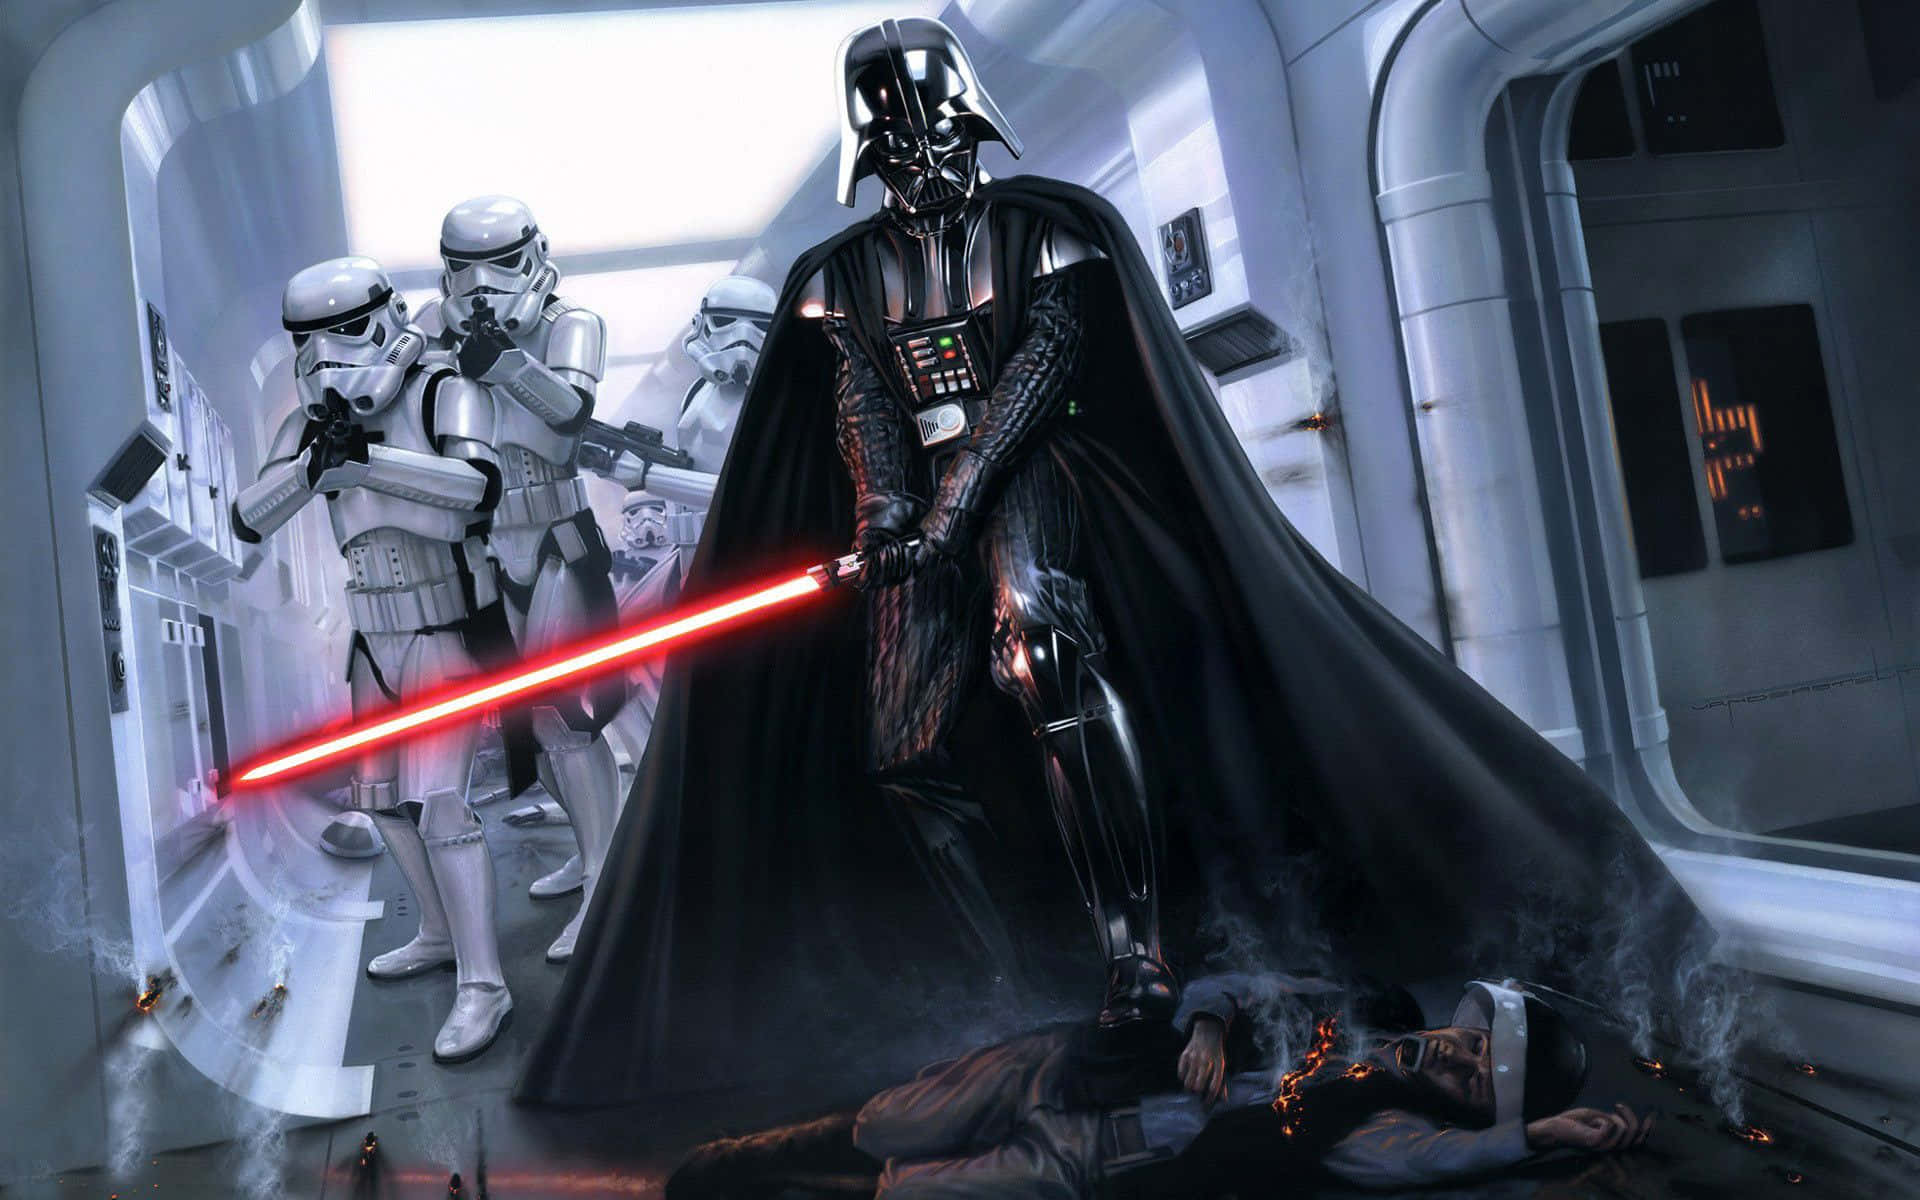 Darth Vader looms intimidatingly over the rebellion.